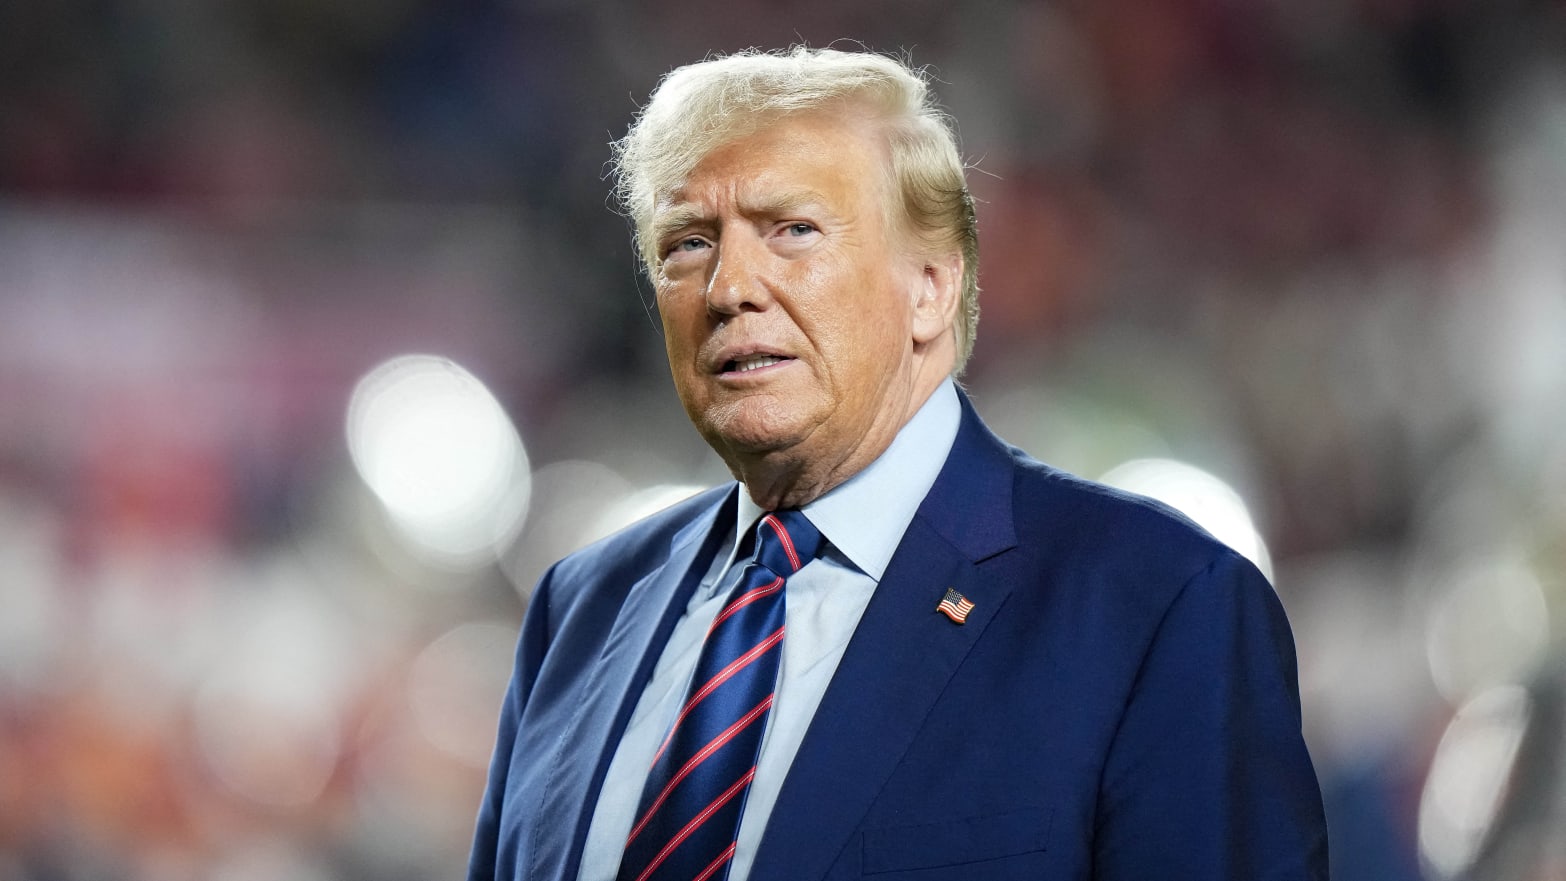 Former President Donald Trump looks on at half time of a game between the South Carolina Gamecocks and the Clemson Tigers at Williams-Brice Stadium. 